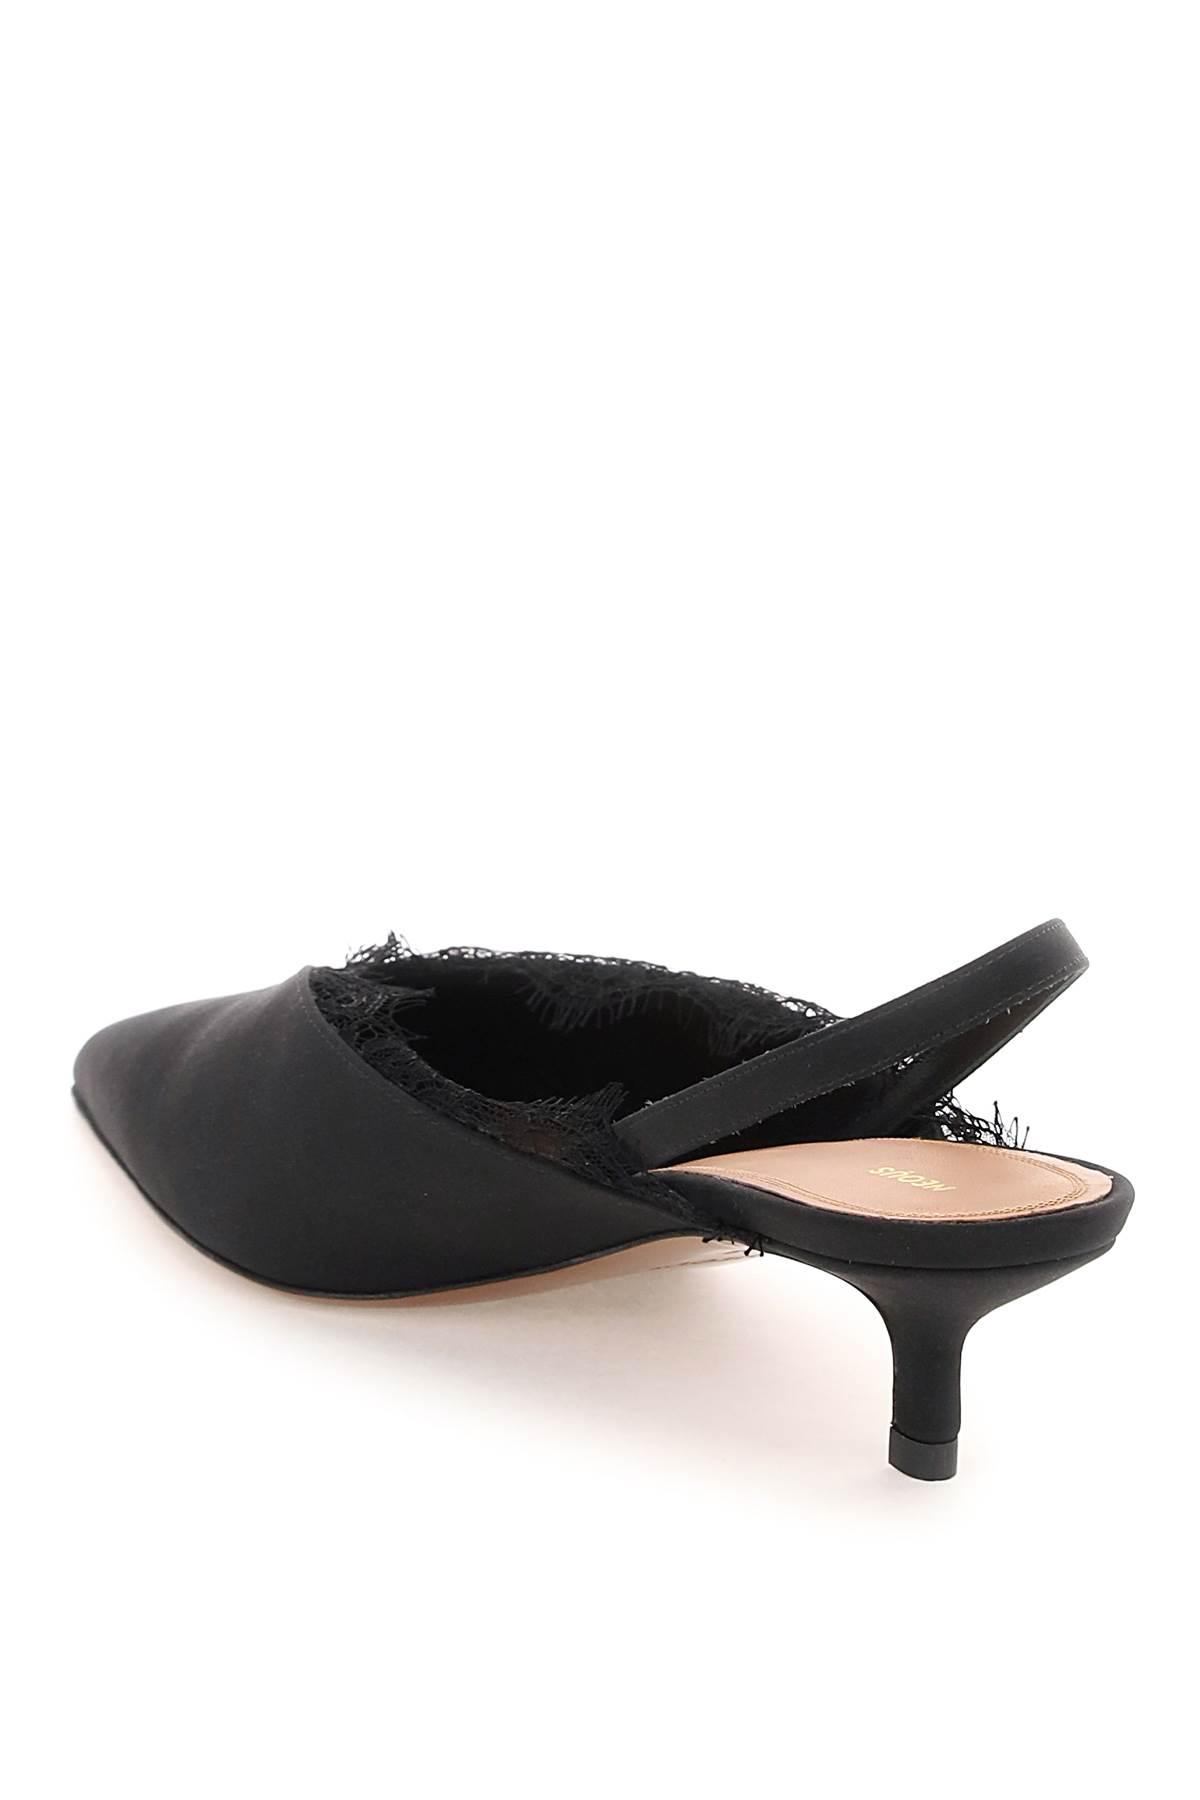 Neous Irena Slingback Pumps in Black | Lyst